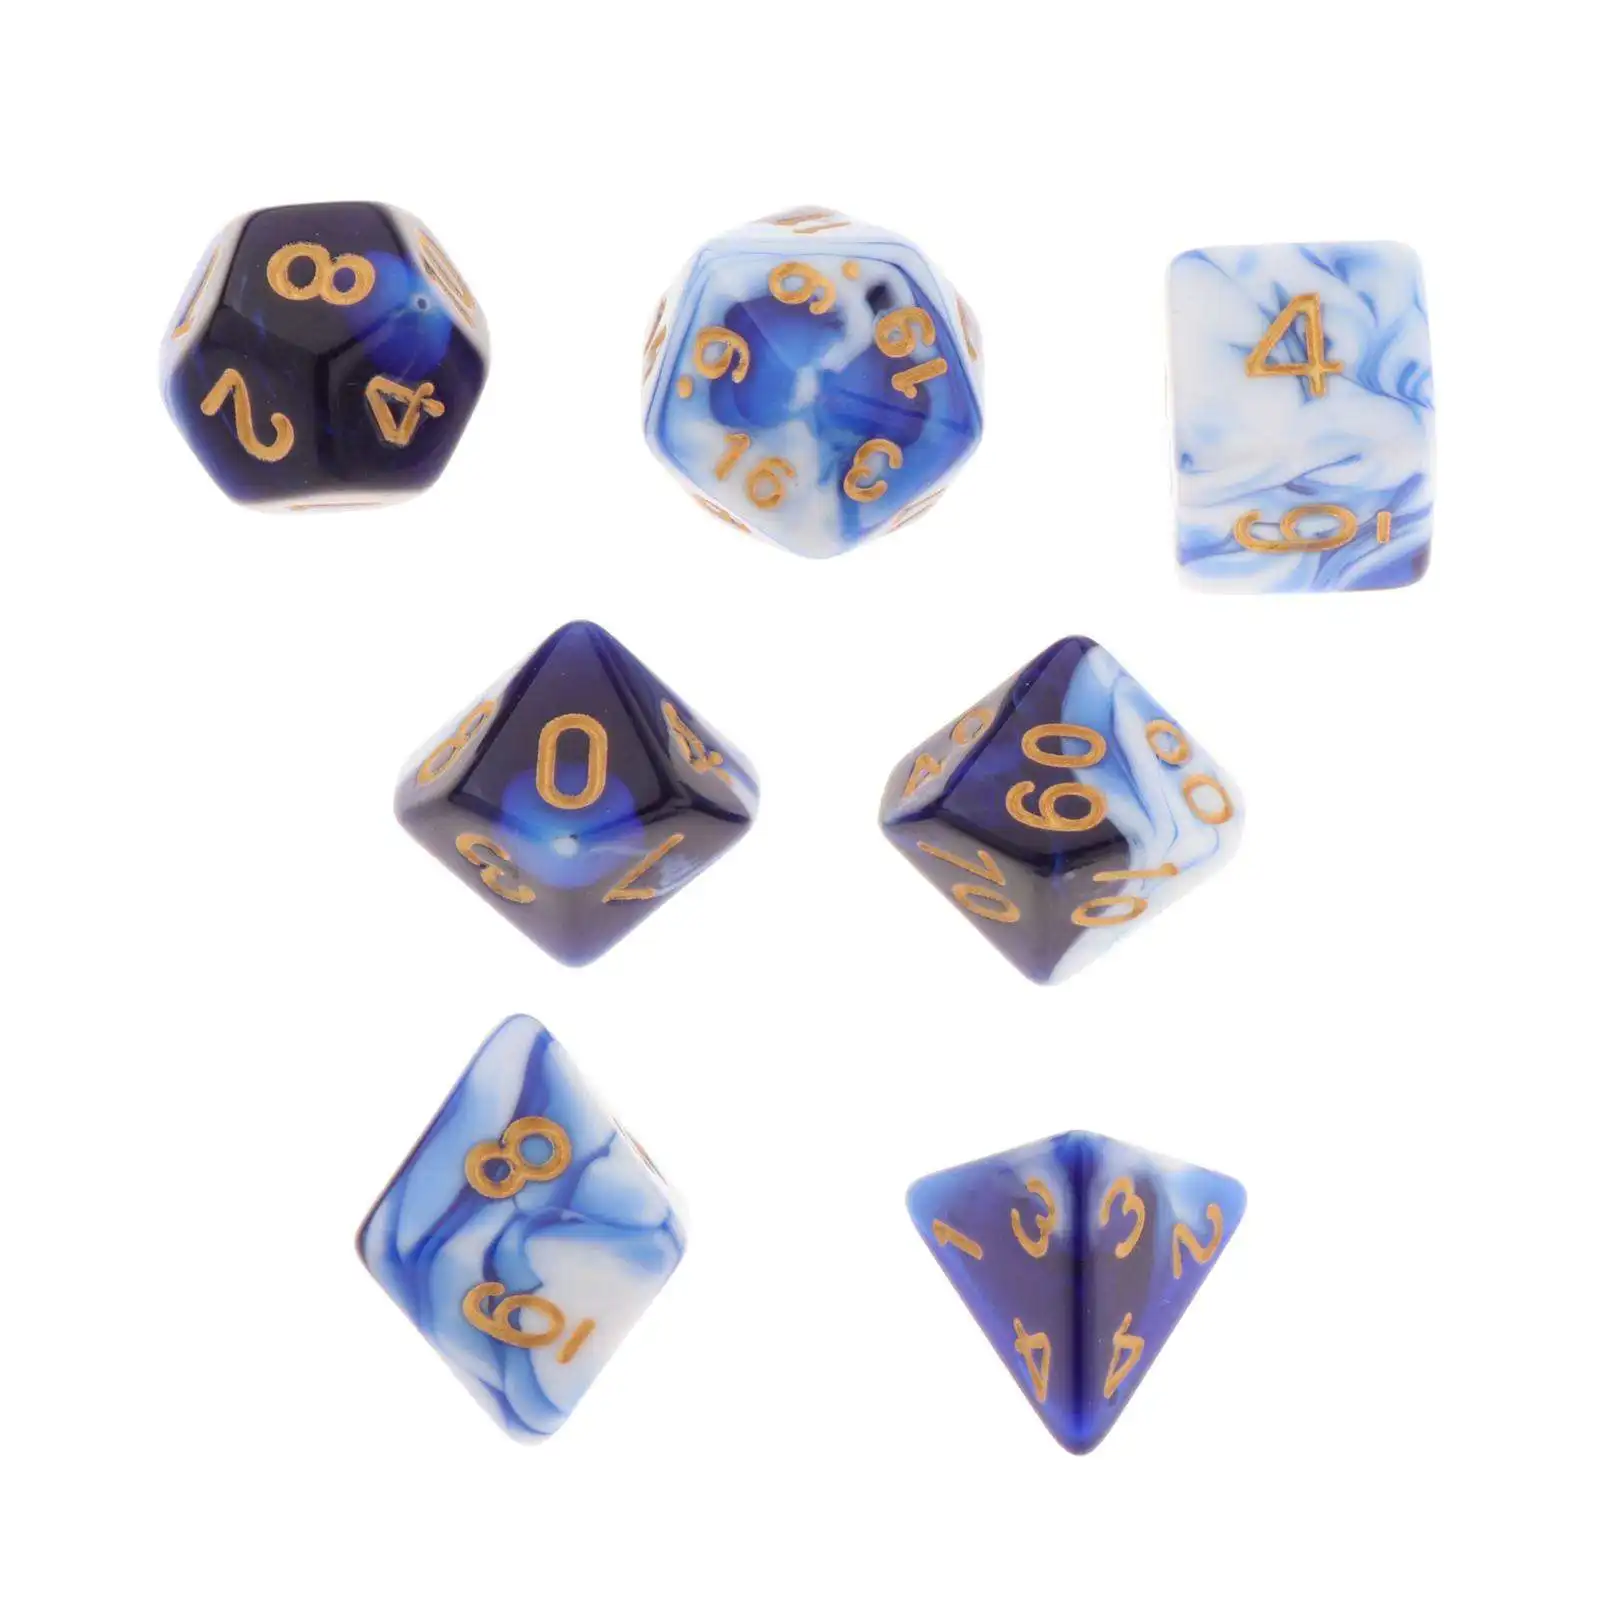 Polyhedral Dice Rpg Dices Family Games Gold Numbers Role Playing Dice for Dnd Rpg Mtg